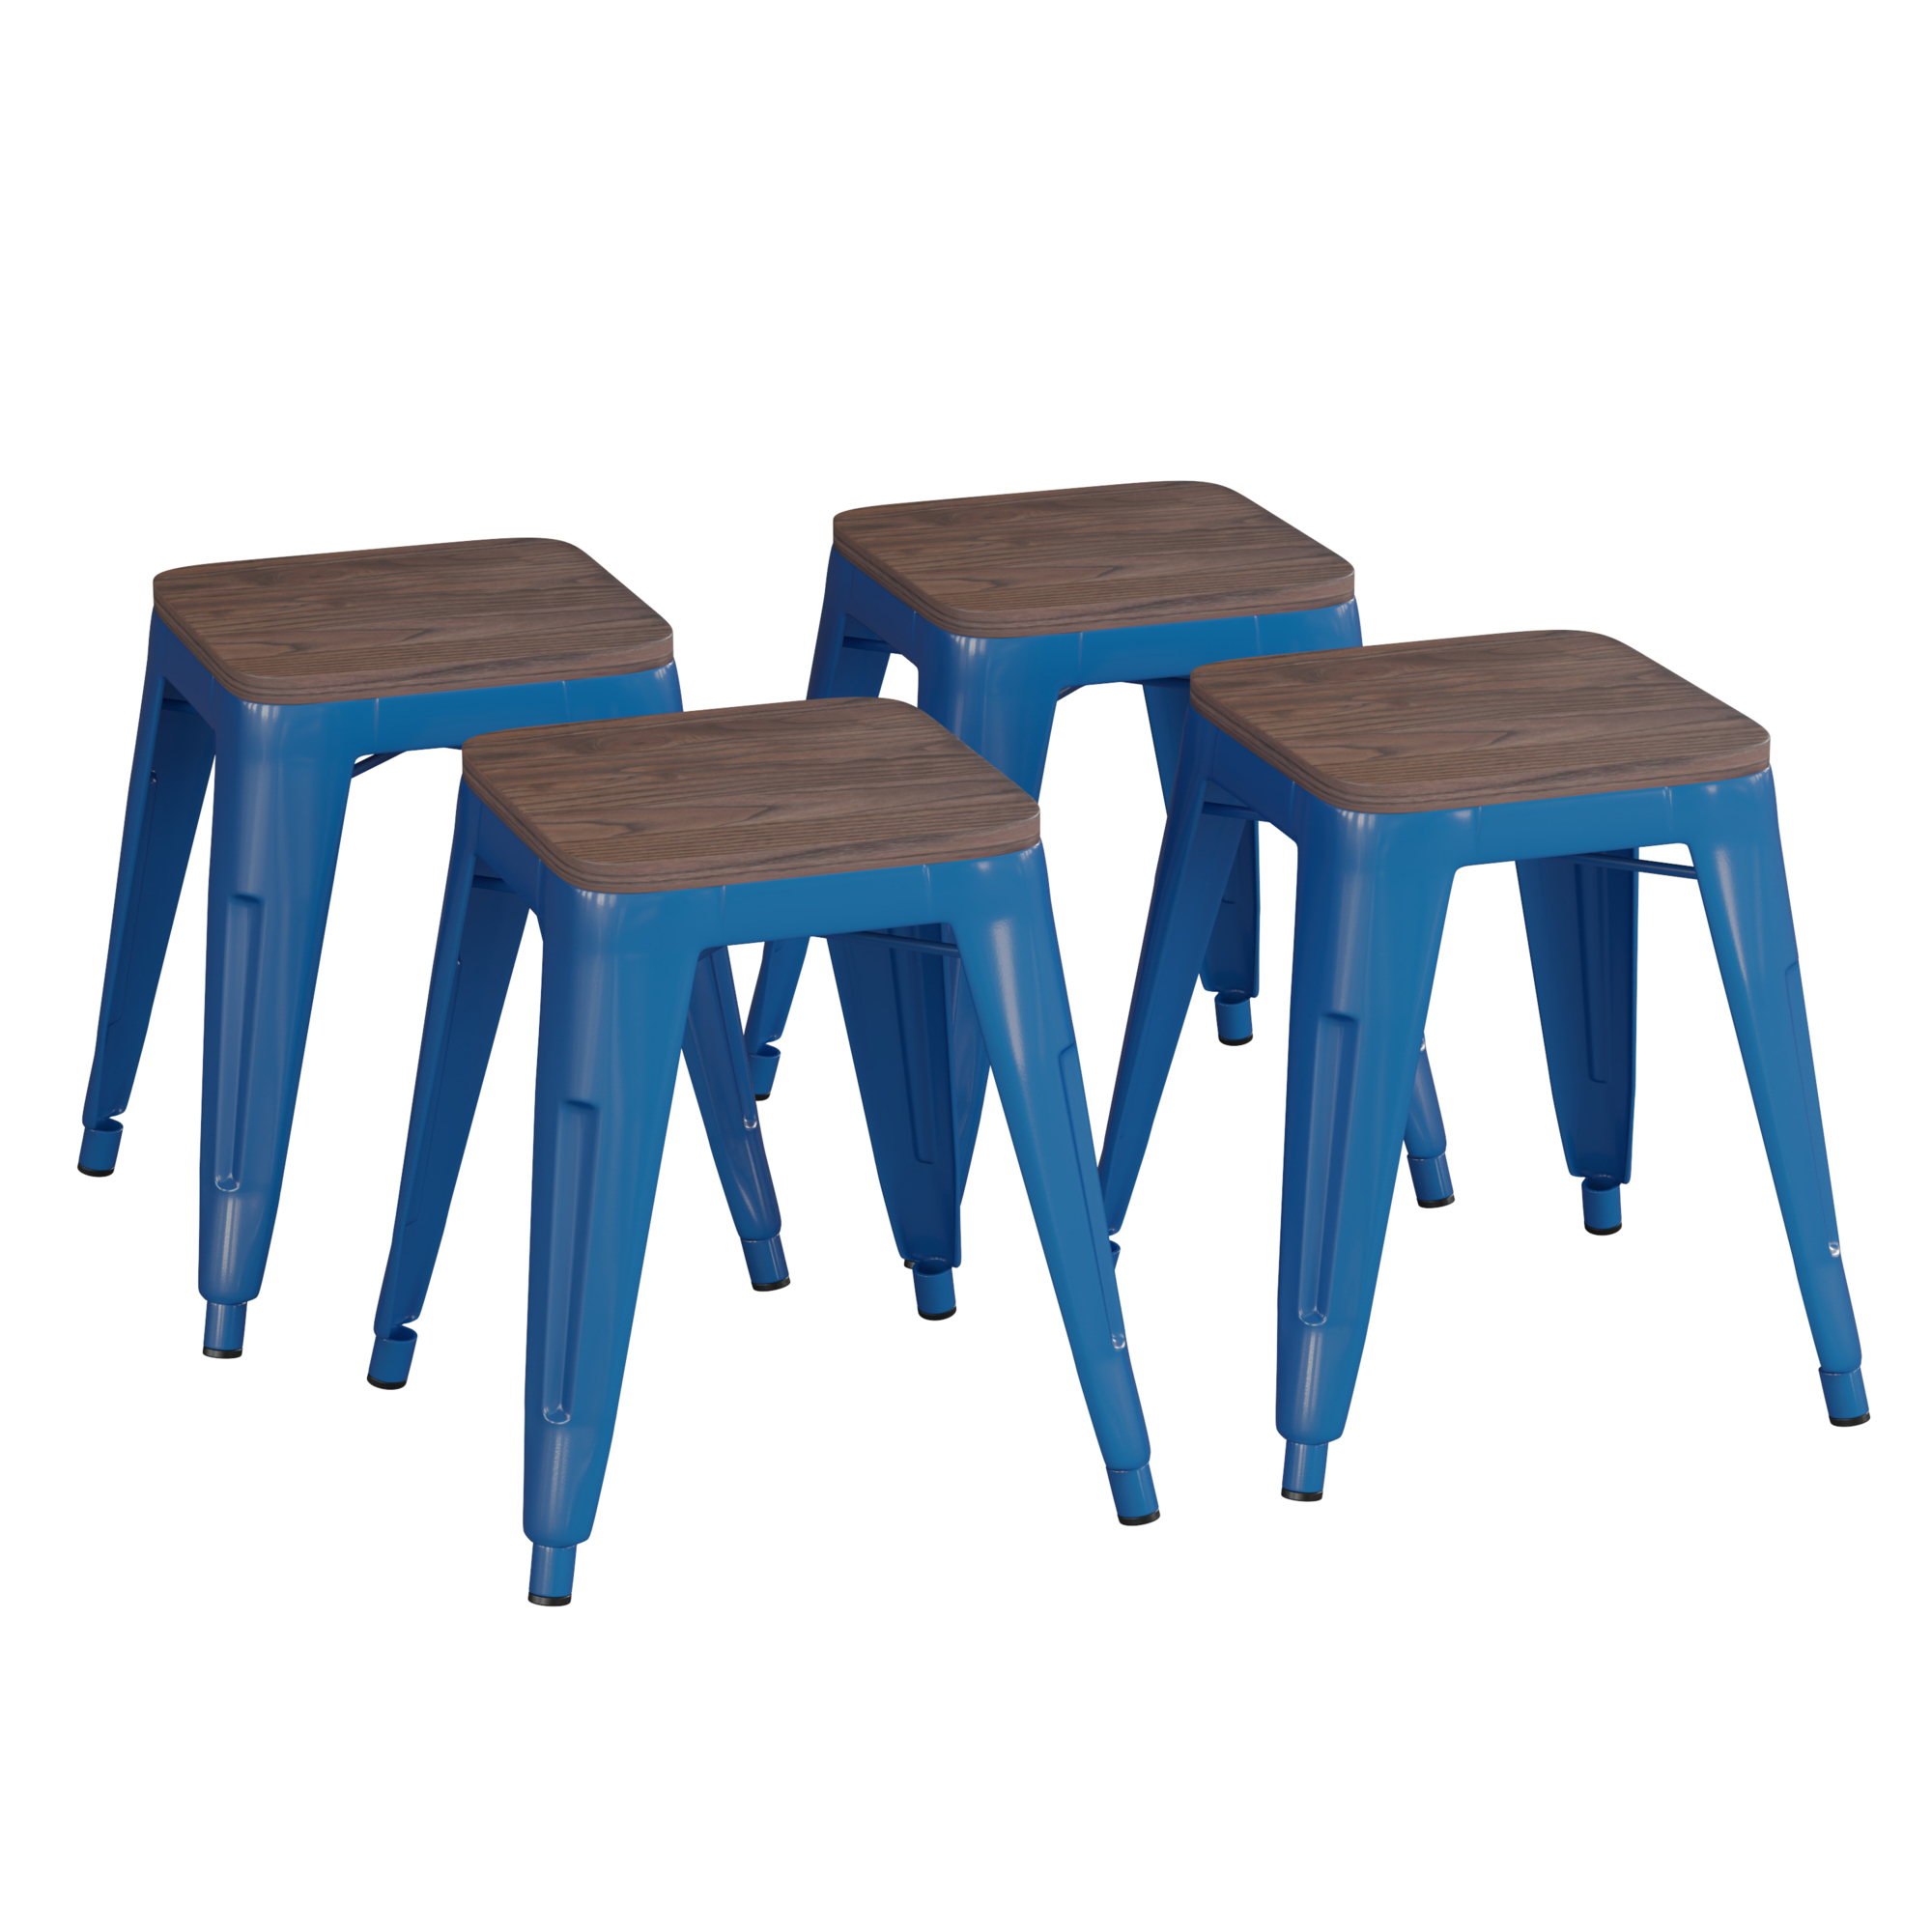 Flash Furniture, 4 Pack 18Inch Royal Blue Metal Stool with Wood Seat, Primary Color Blue, Included (qty.) 4, Model ETBT350318BLWD